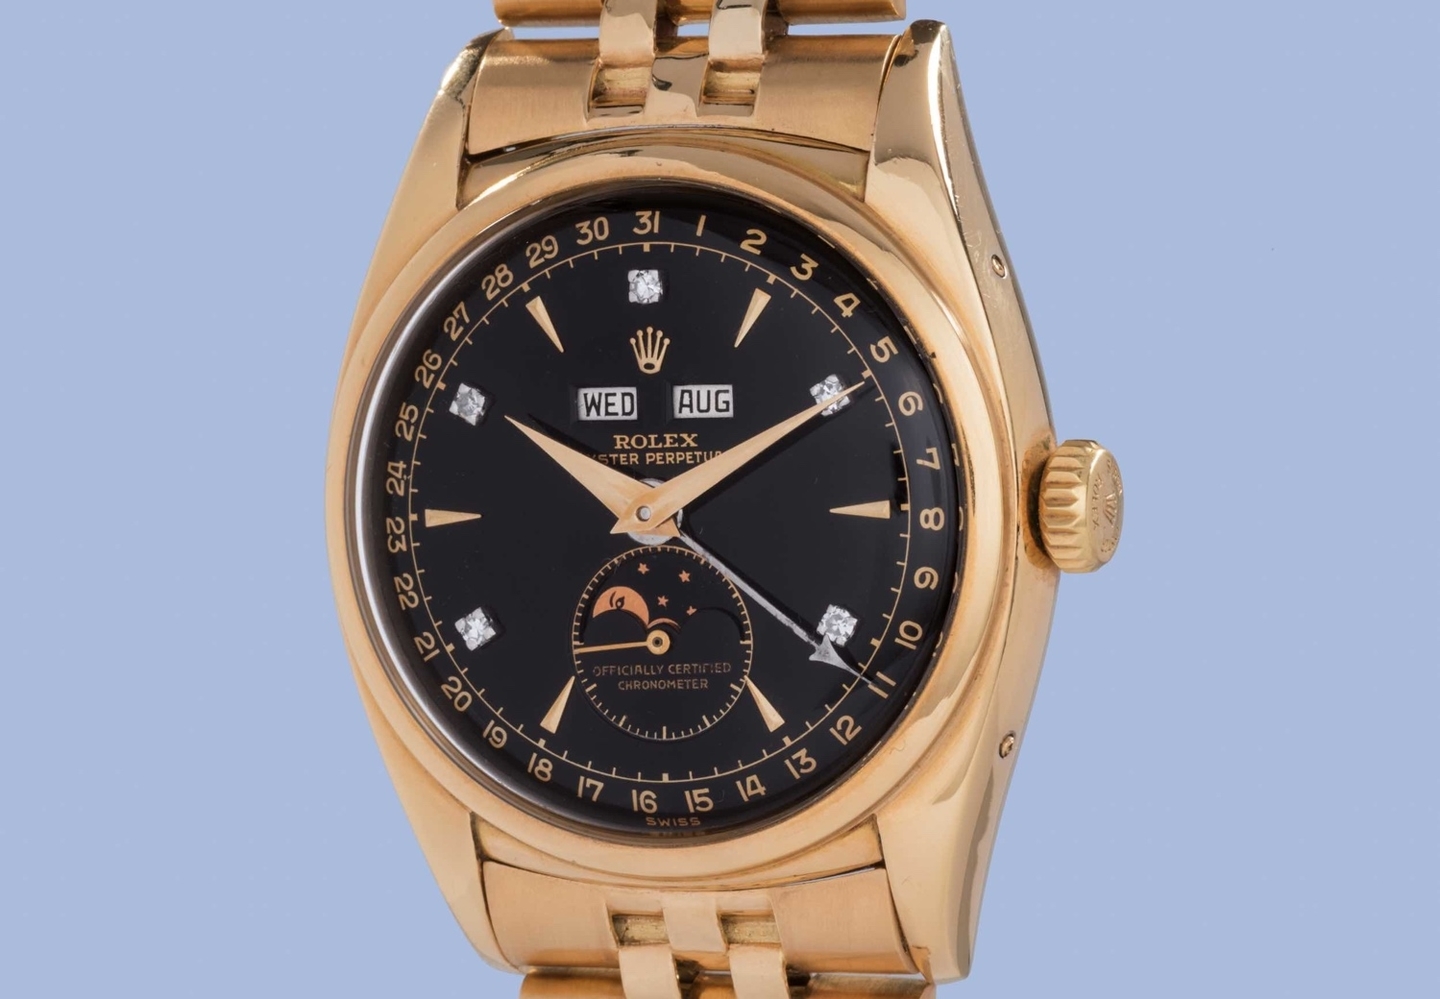 Most expensive Rolex ever sold at auction - Luxury Watches Brands ...